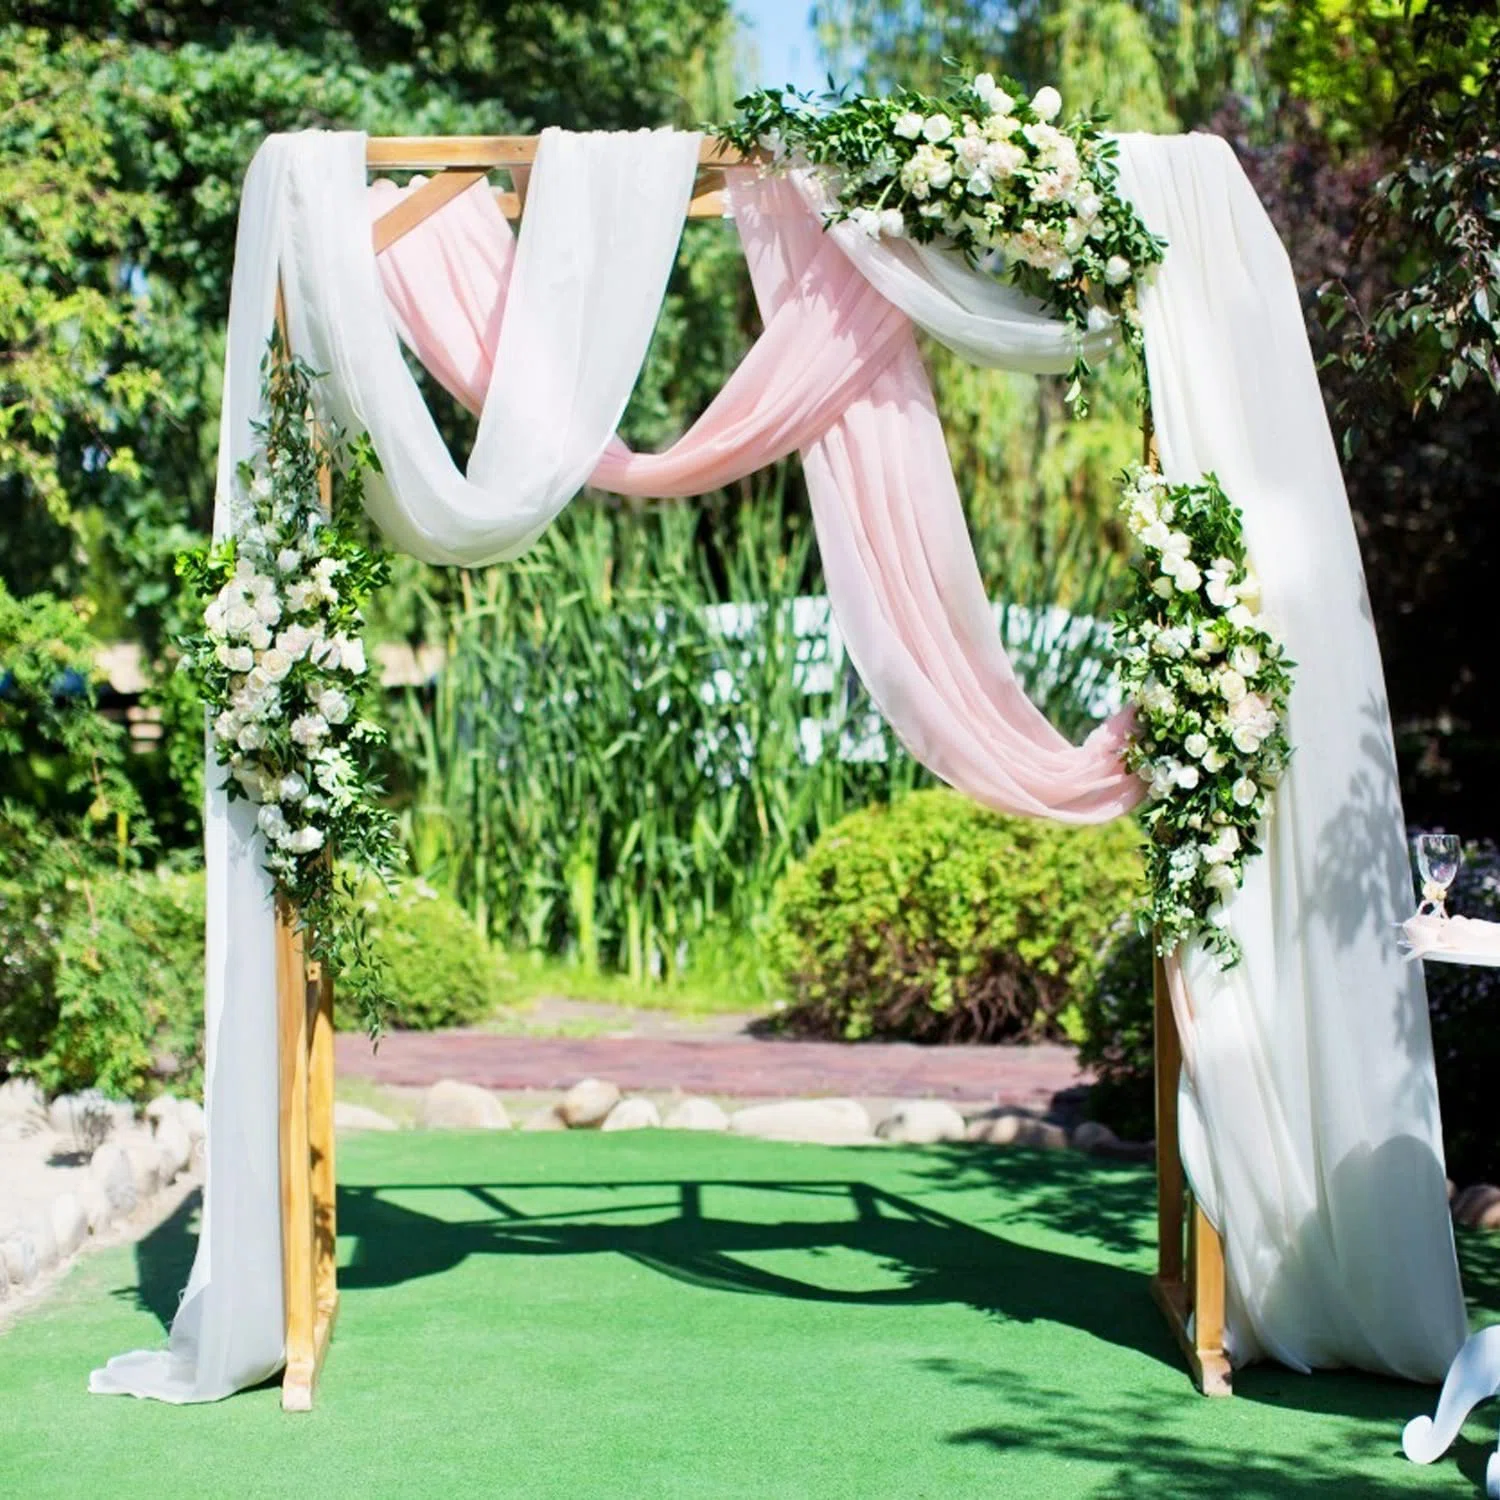 Floral wedding backdrop with flowers